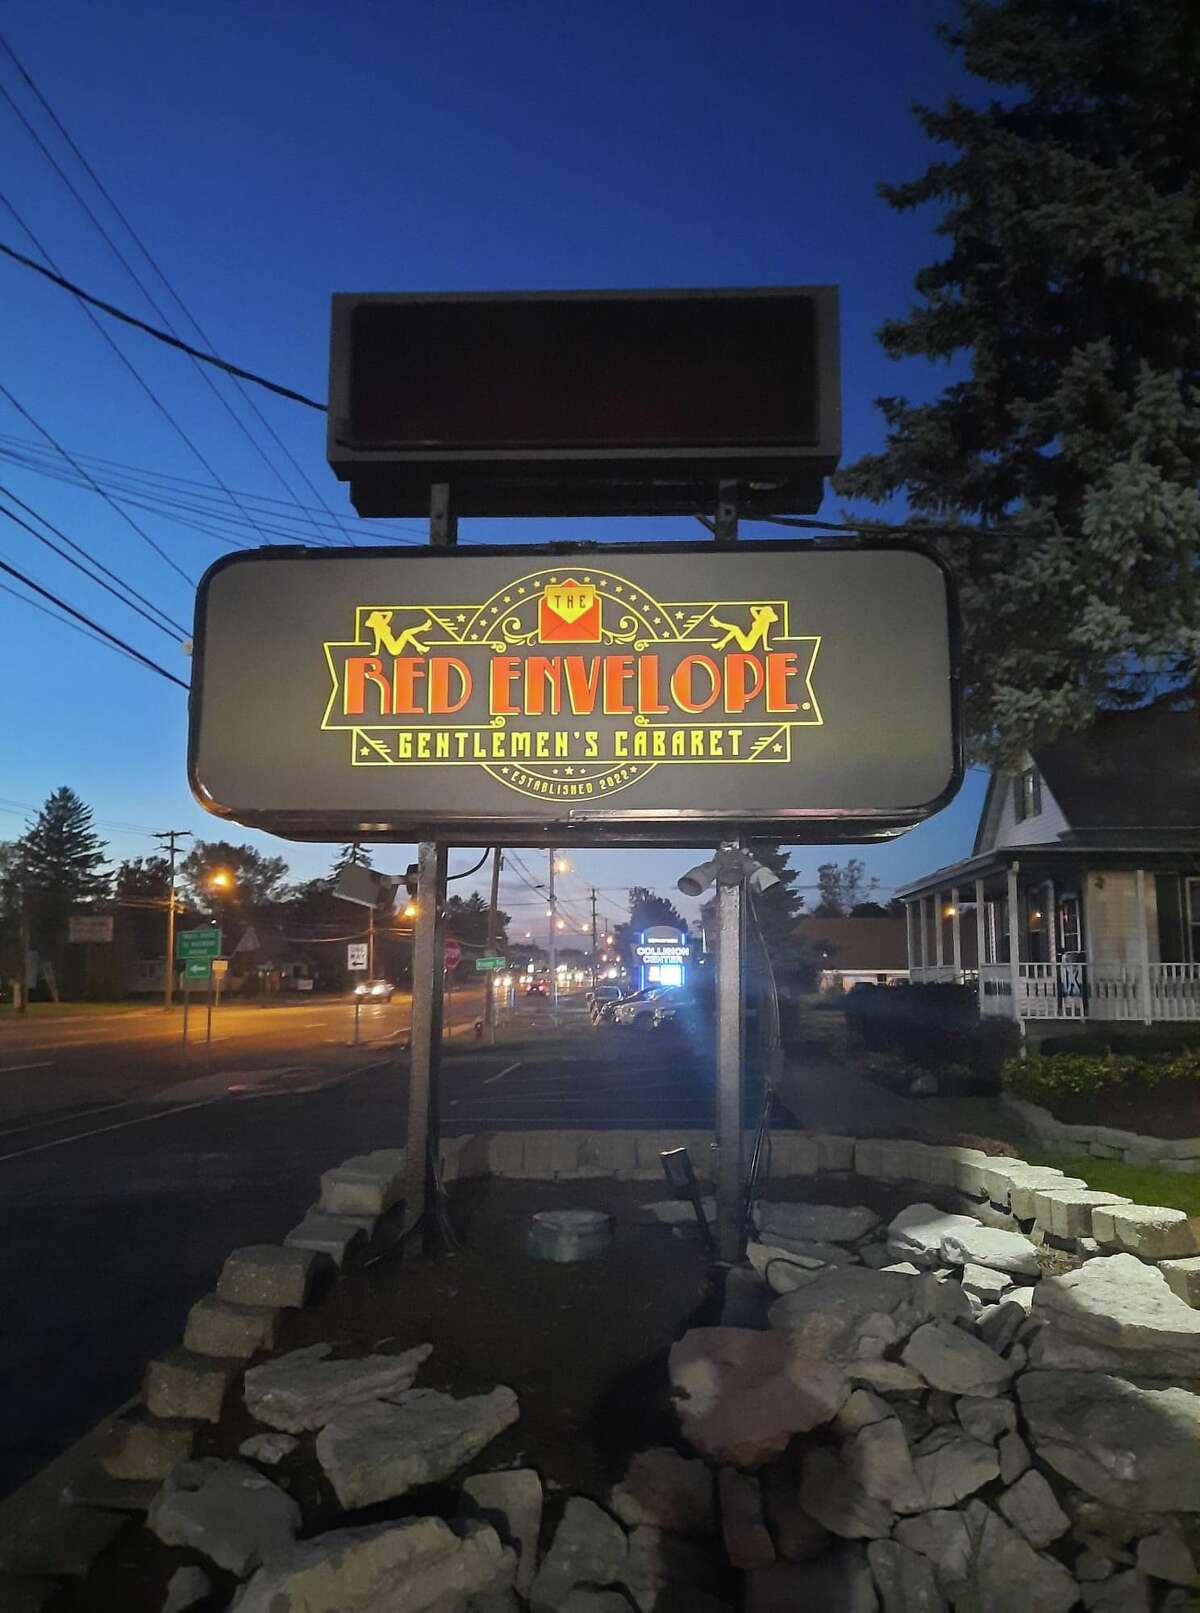 A new sign and upgraded landscaping announce The Red Envelope, a strip bar taking over the former location of DiCarlo's Gentlemen's Club in Colonie. The Red Envelope opens Dec. 1, 2022.